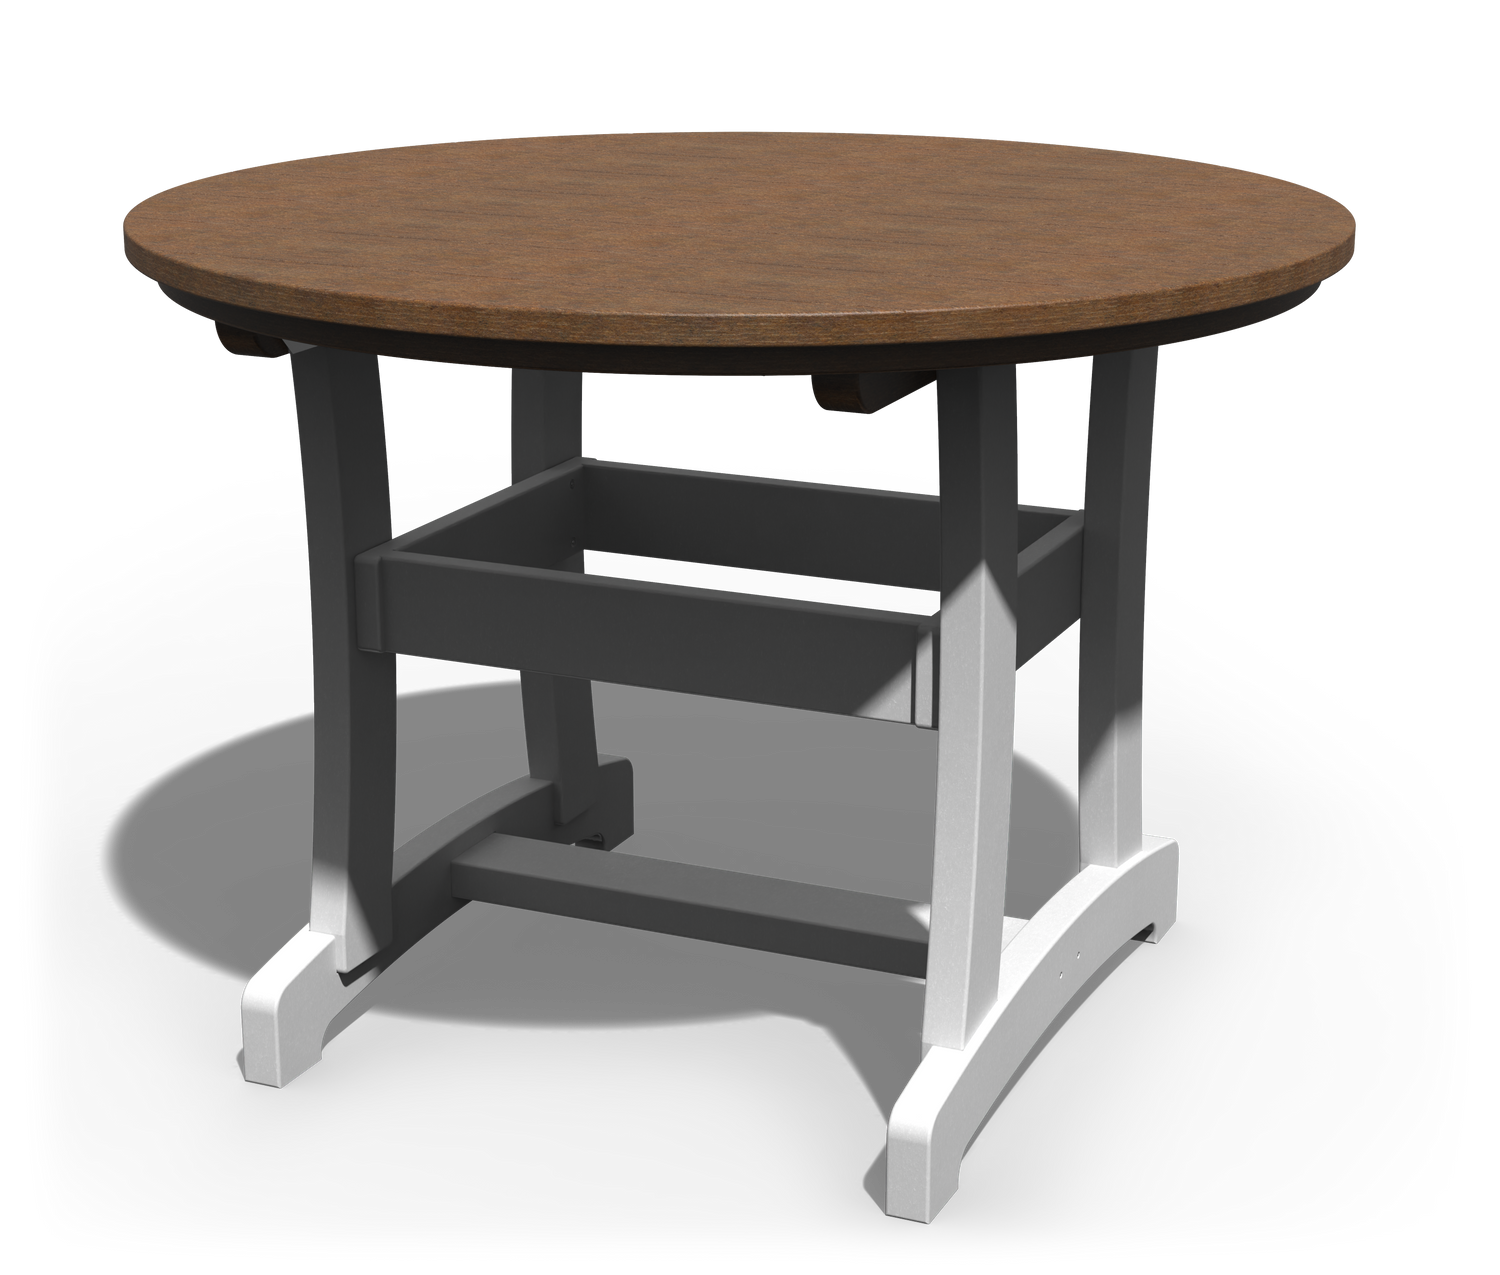 Patiova Poly Dining Height Table Collection